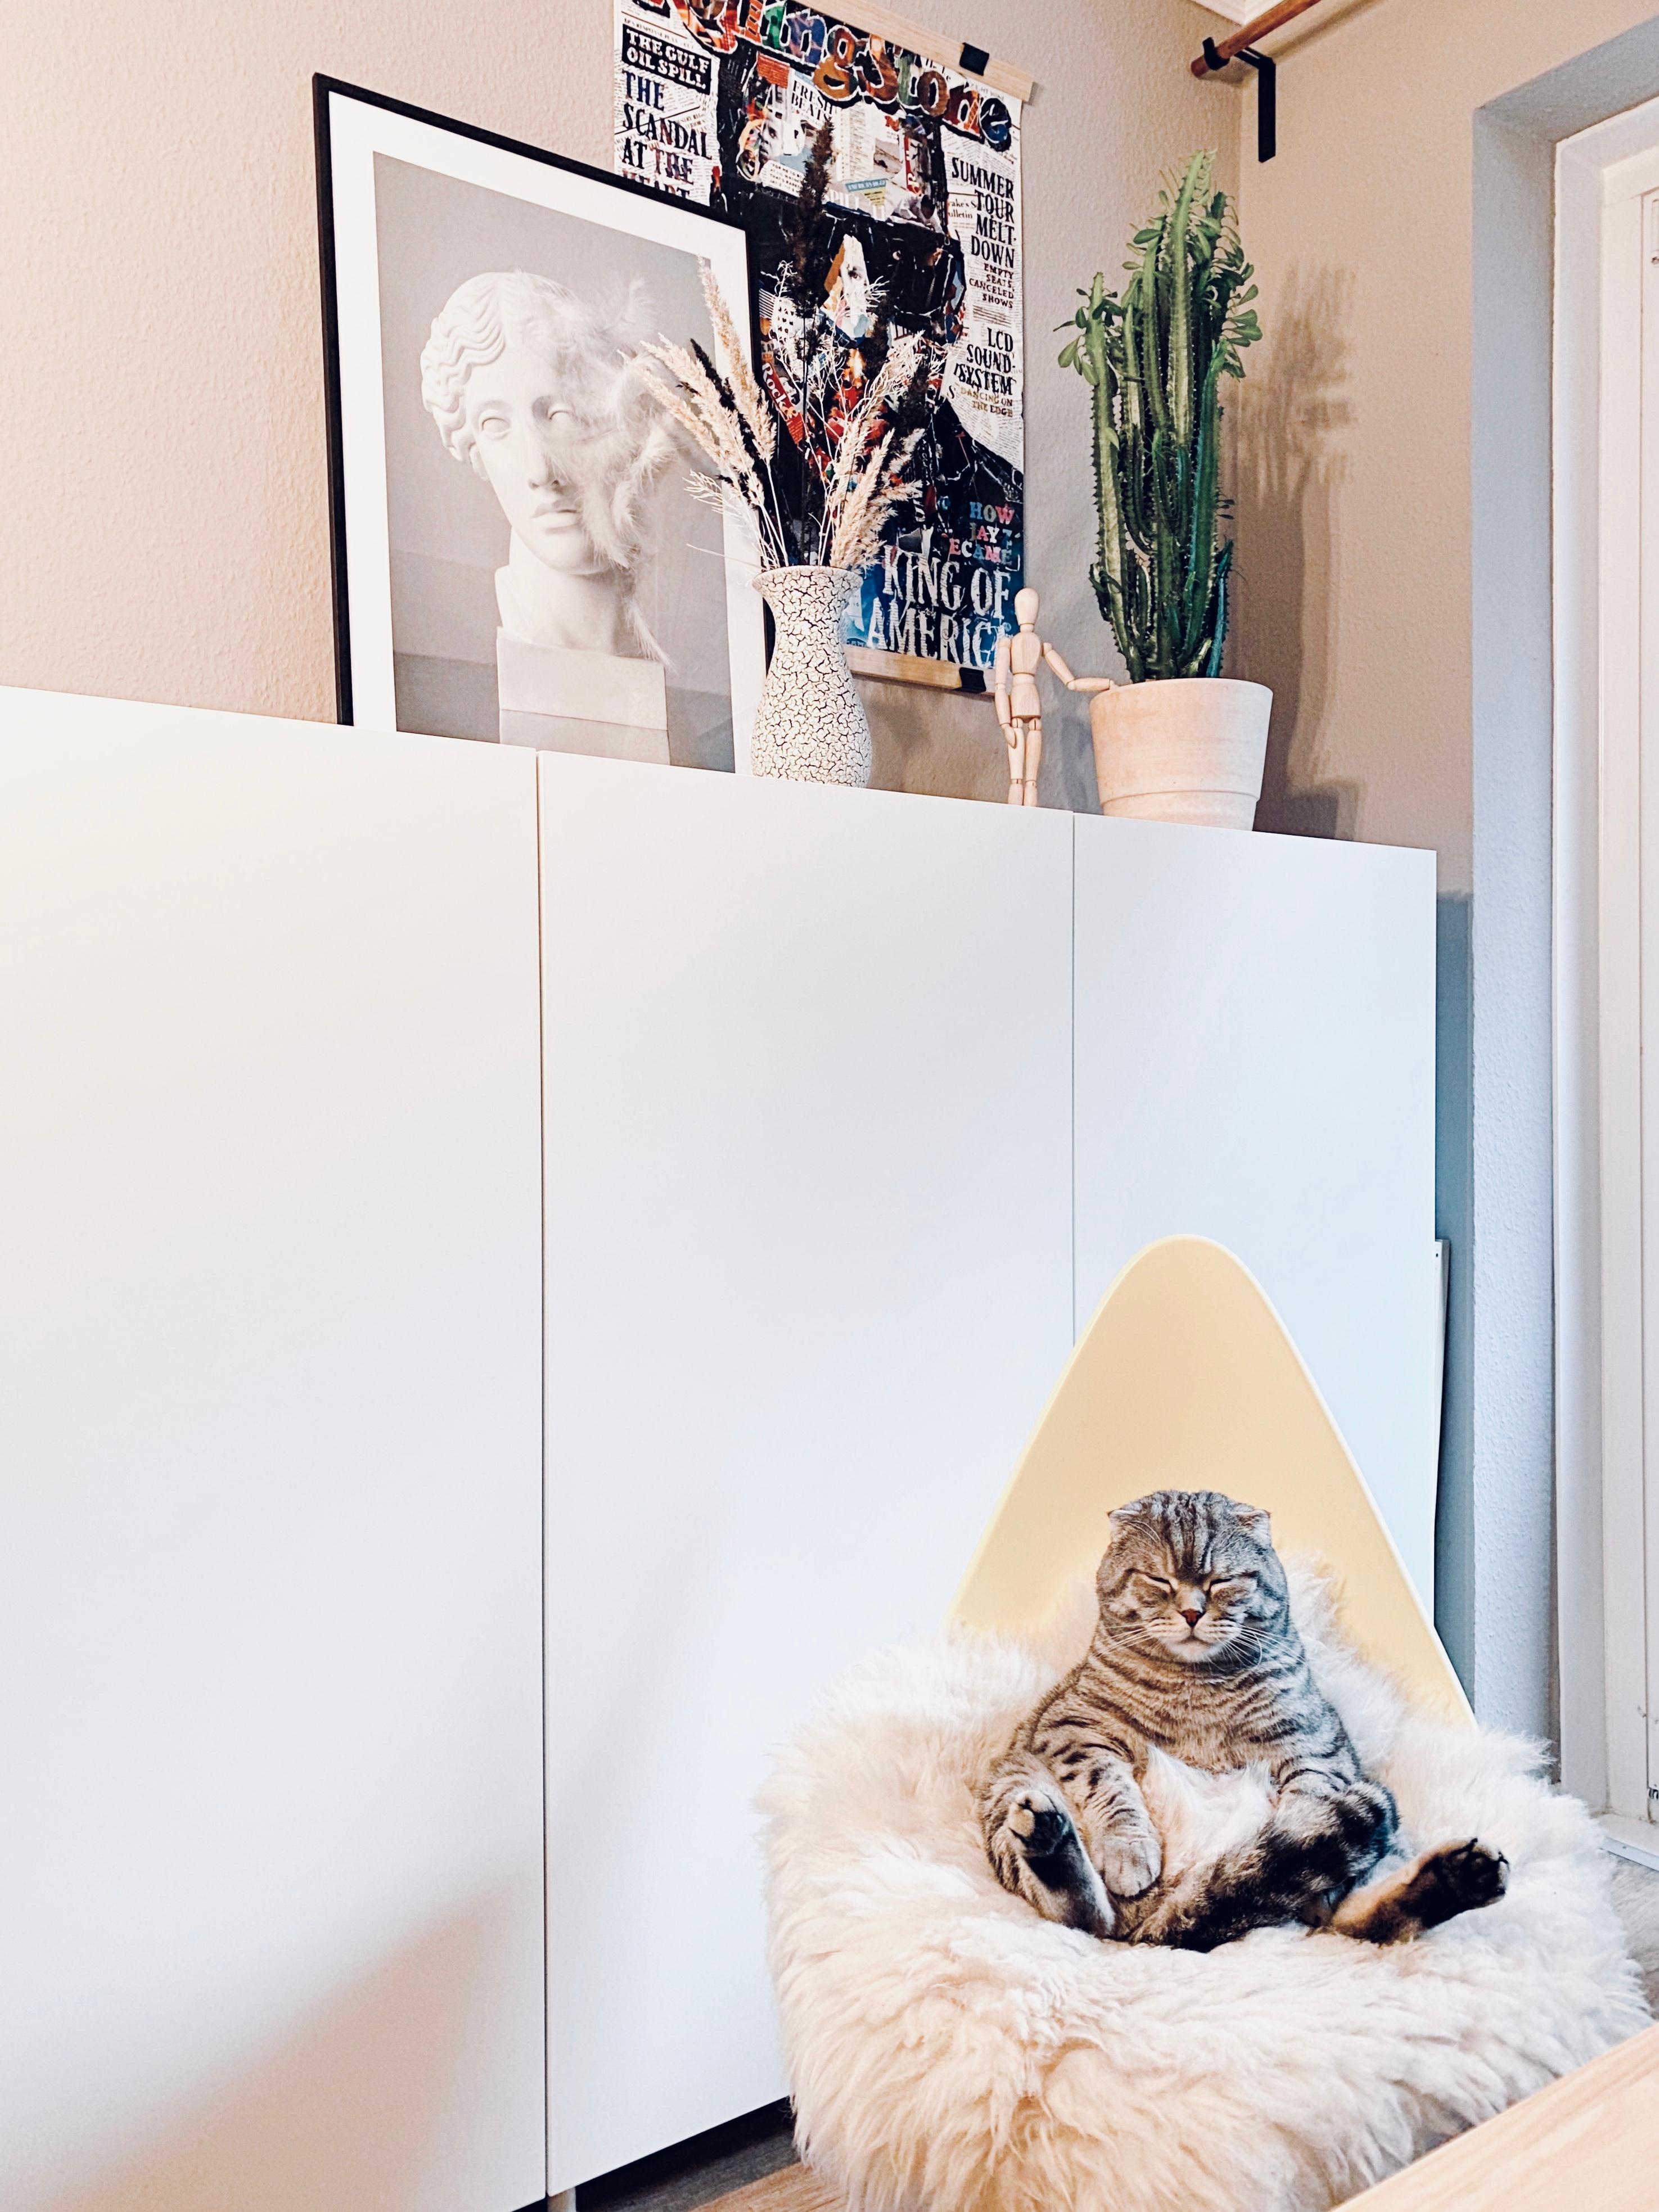 Lazy Sunday
#workingspace #interior #nordicroom #scandinavianliving #hygge #catlover 